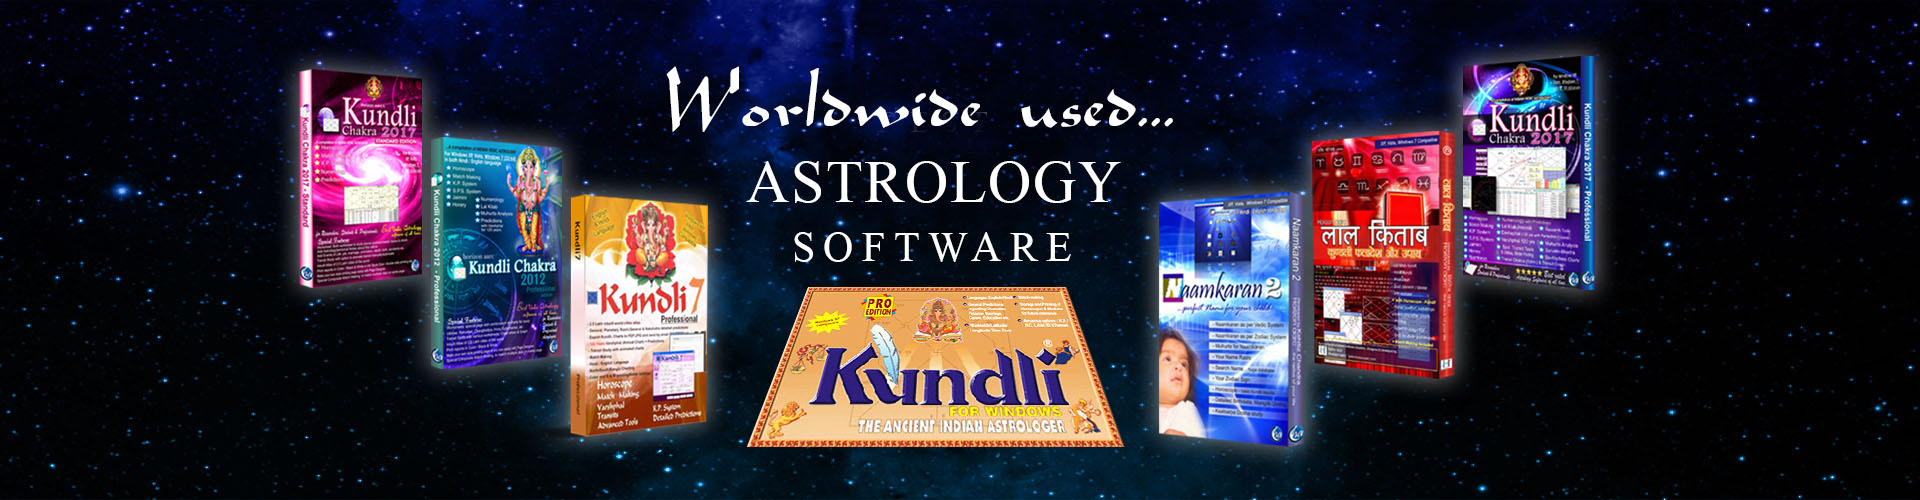 Na PO wsed...

ASTROLOGY
SOFTWARE